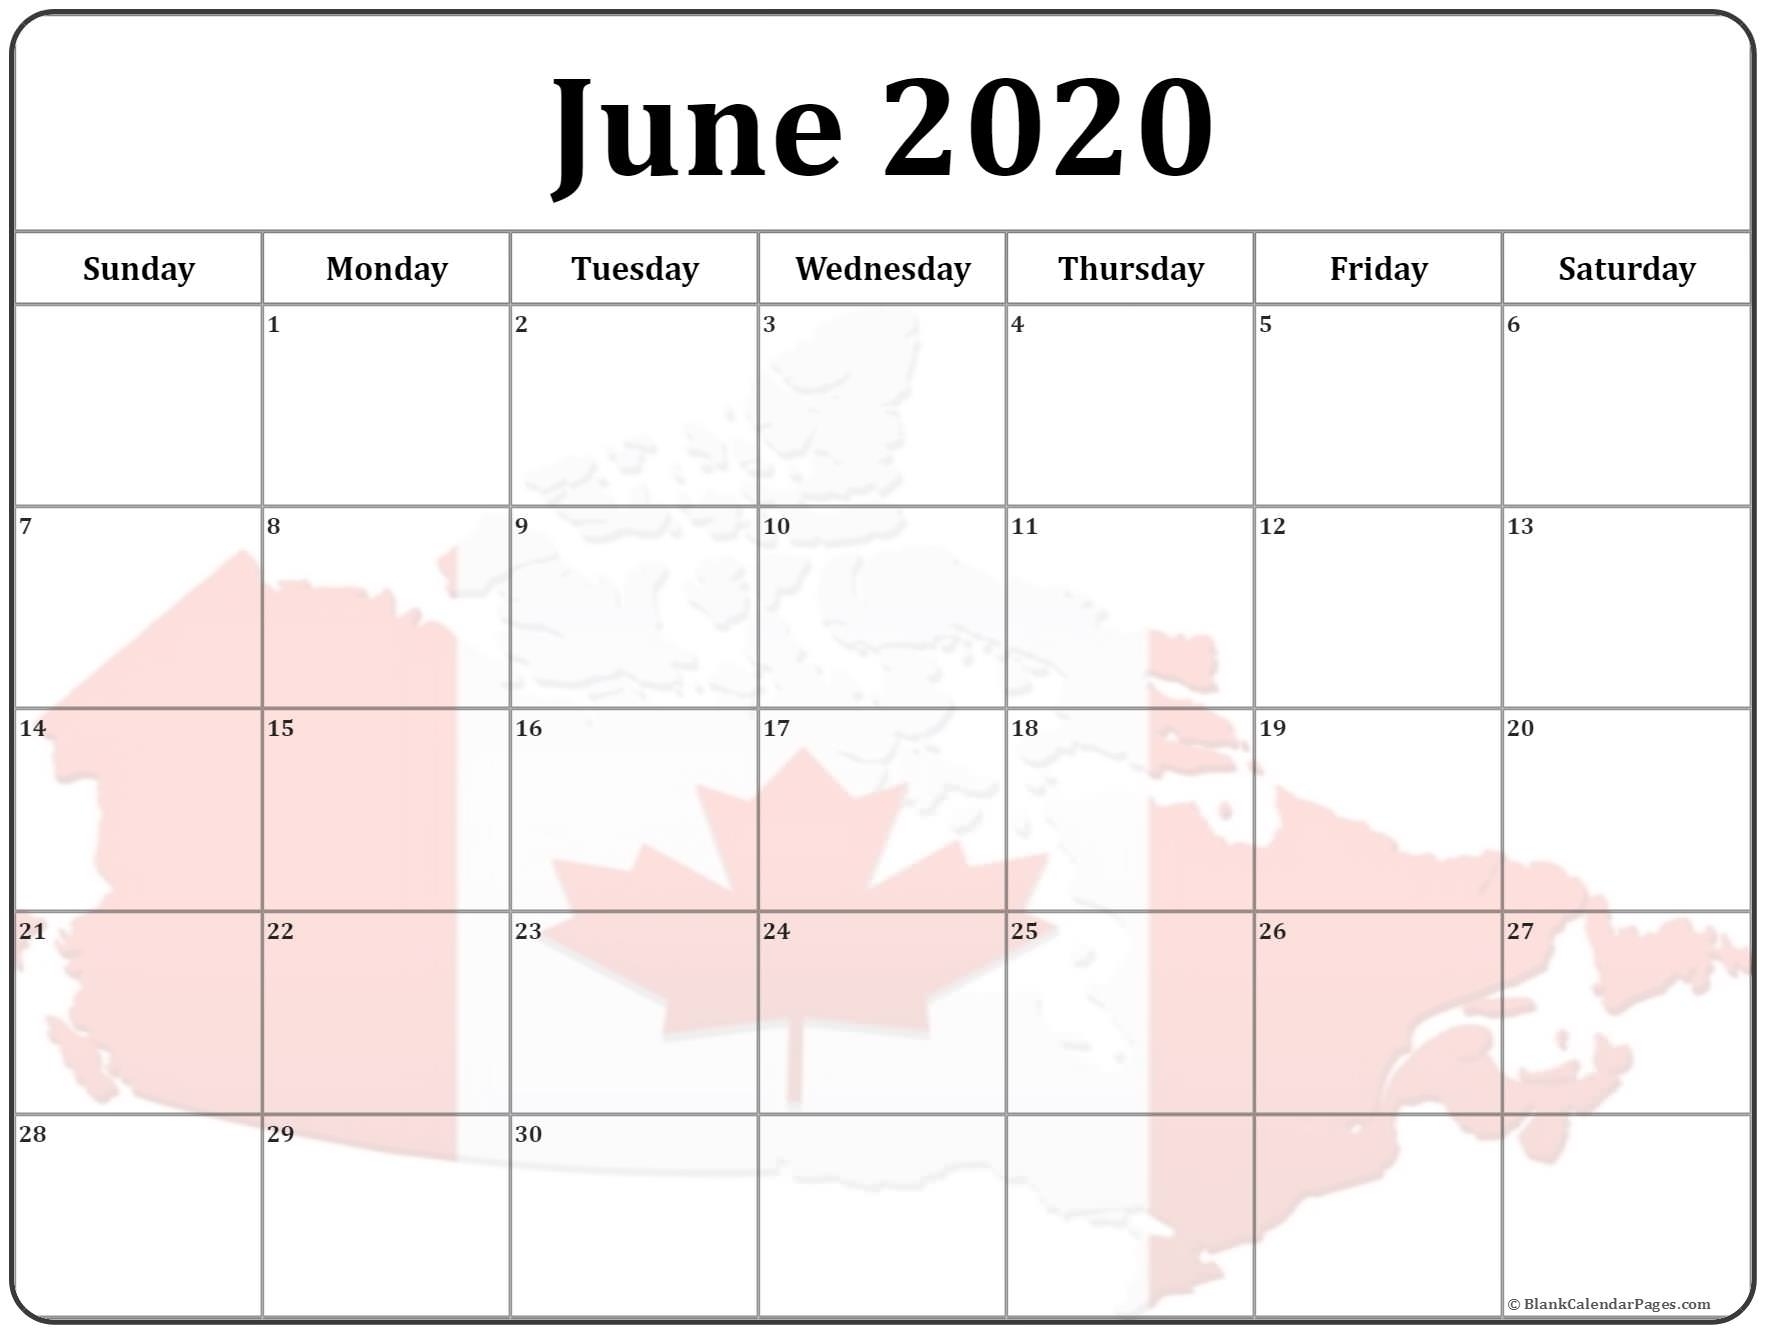 Collection Of June 2020 Photo Calendars With Image Filters. June 2020 Calendar Canada